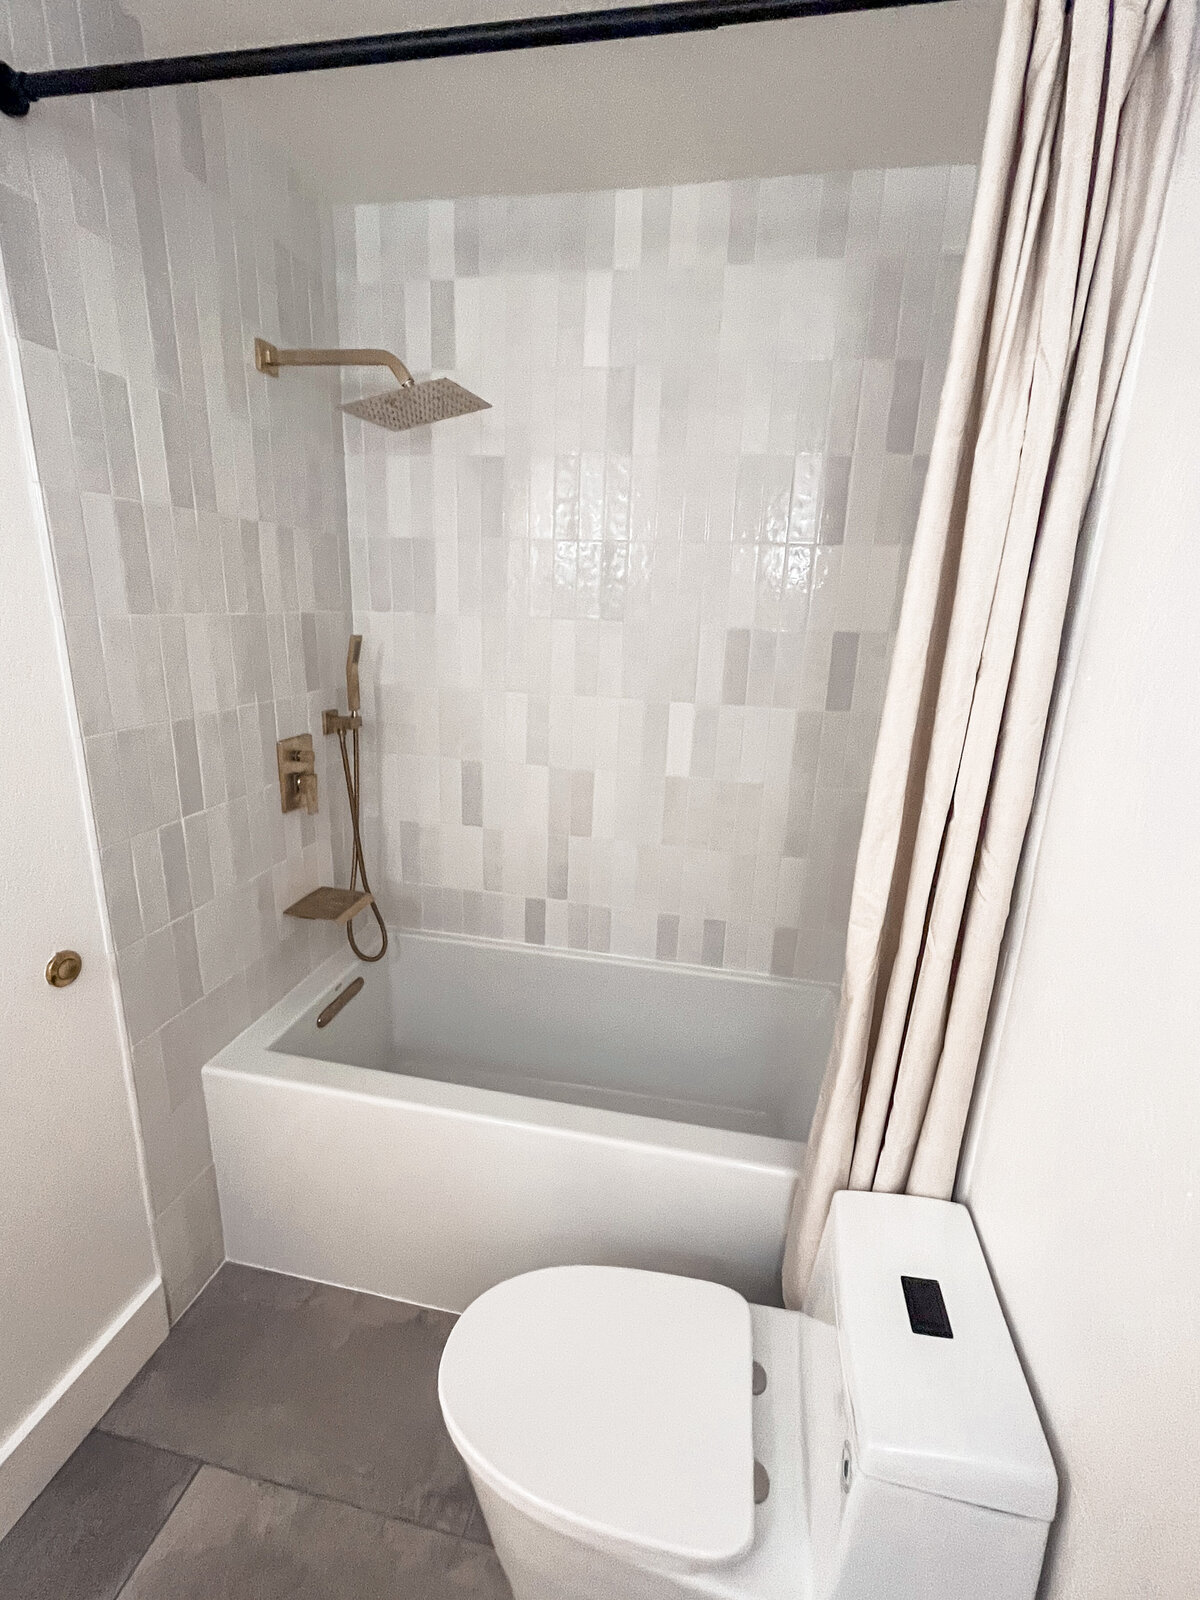 A small white bathroom with a big white soaking tub, gold hardware, and delicate grey and white vertical tiles.